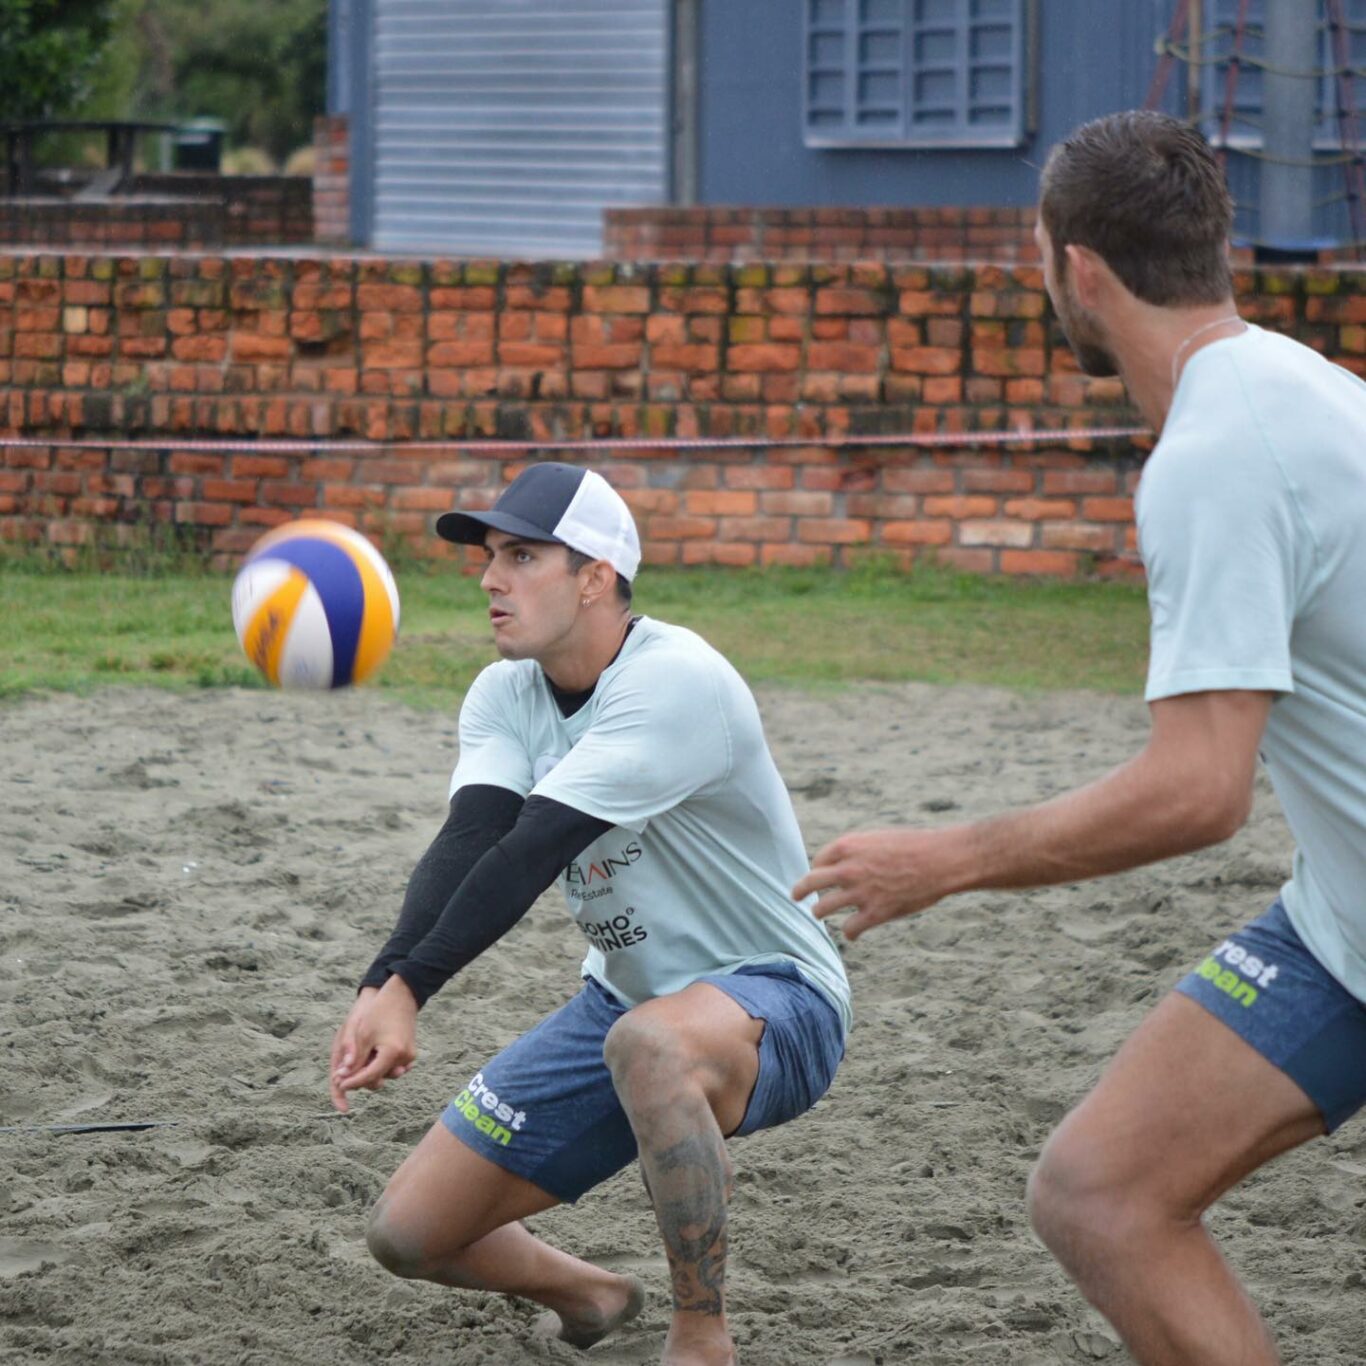 On the podium – J. Gardner Homes NZ Beach Volleyball Tour Nelson action.